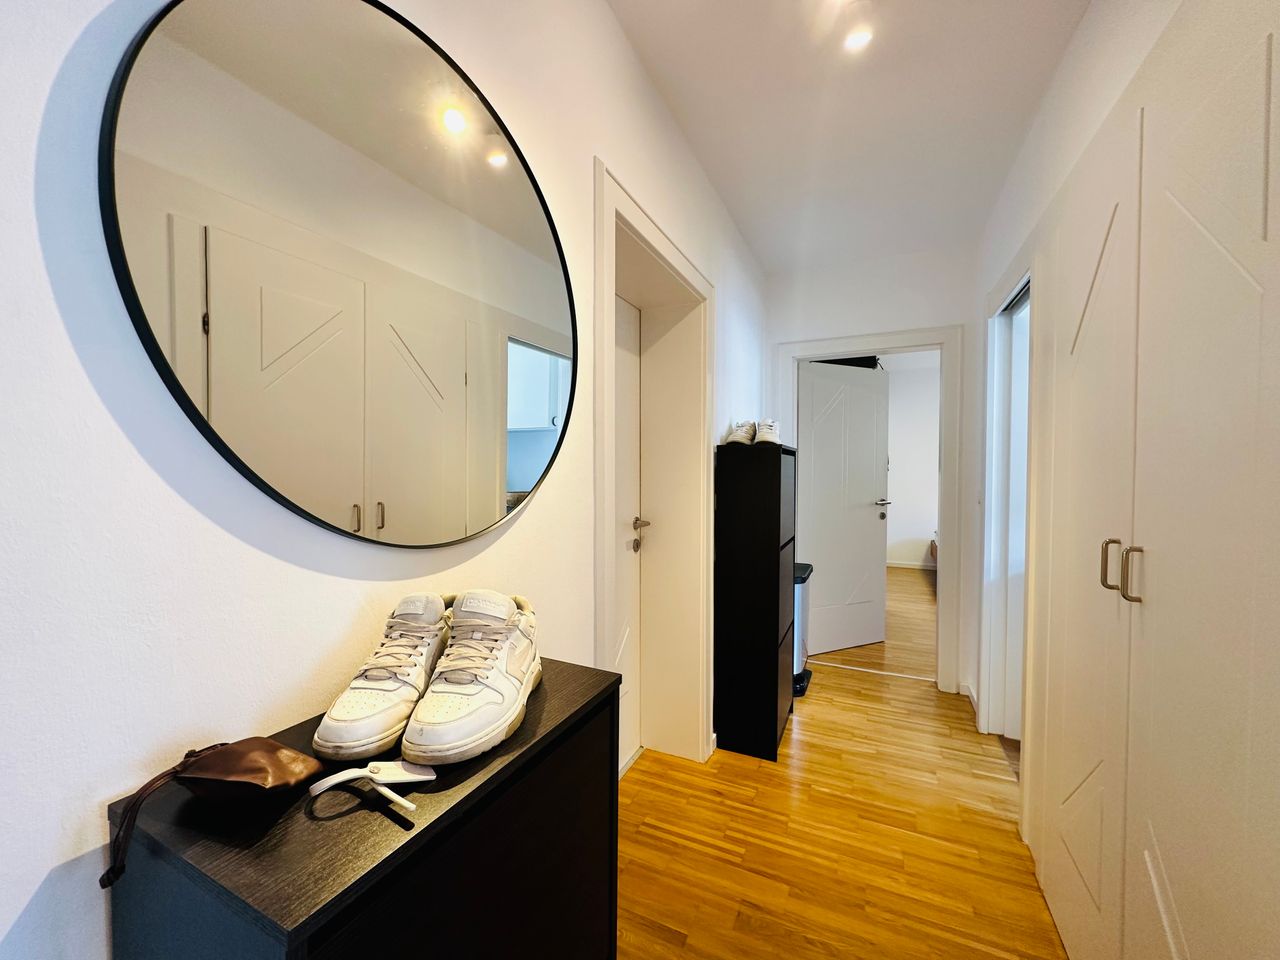 Exclusive apartment in the heart of Munich!